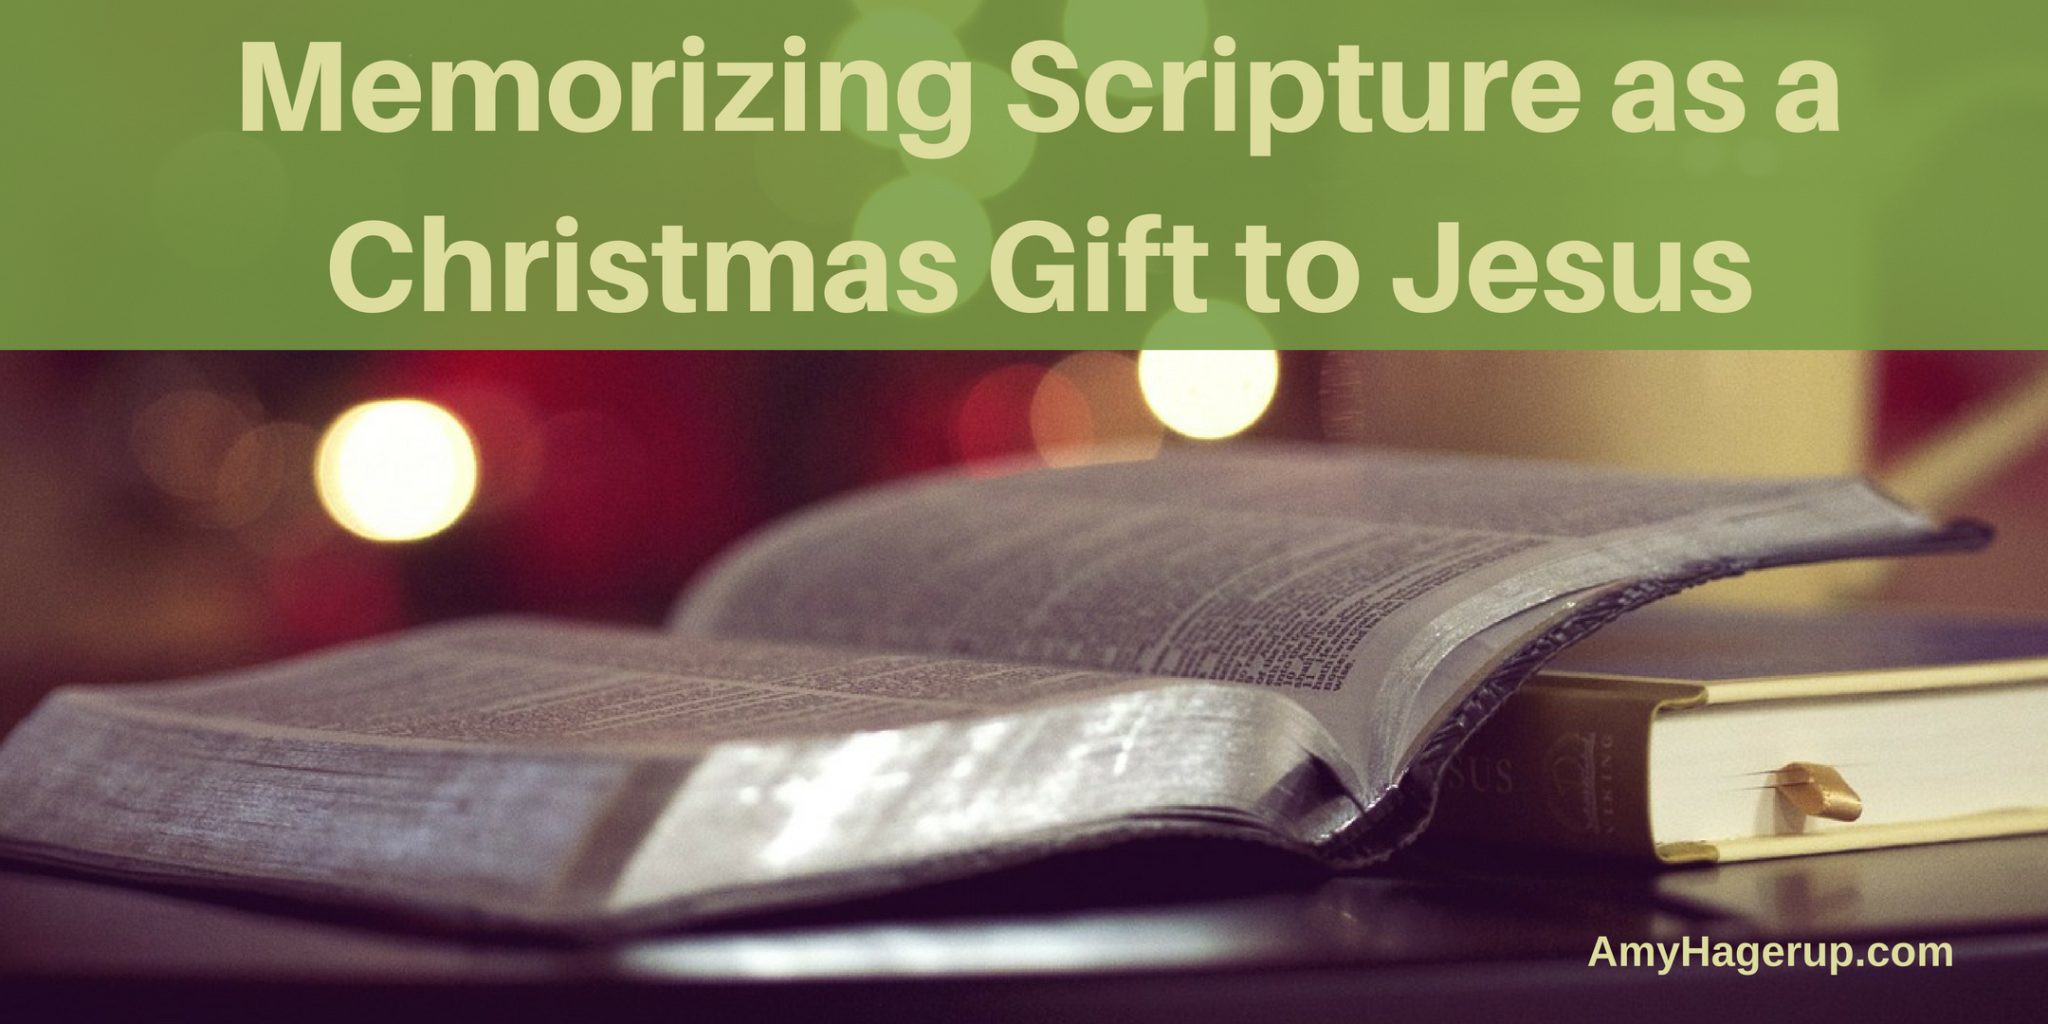 Memorizing scripture is awesome as a Christmas gift to Jesus. Do it as a family.